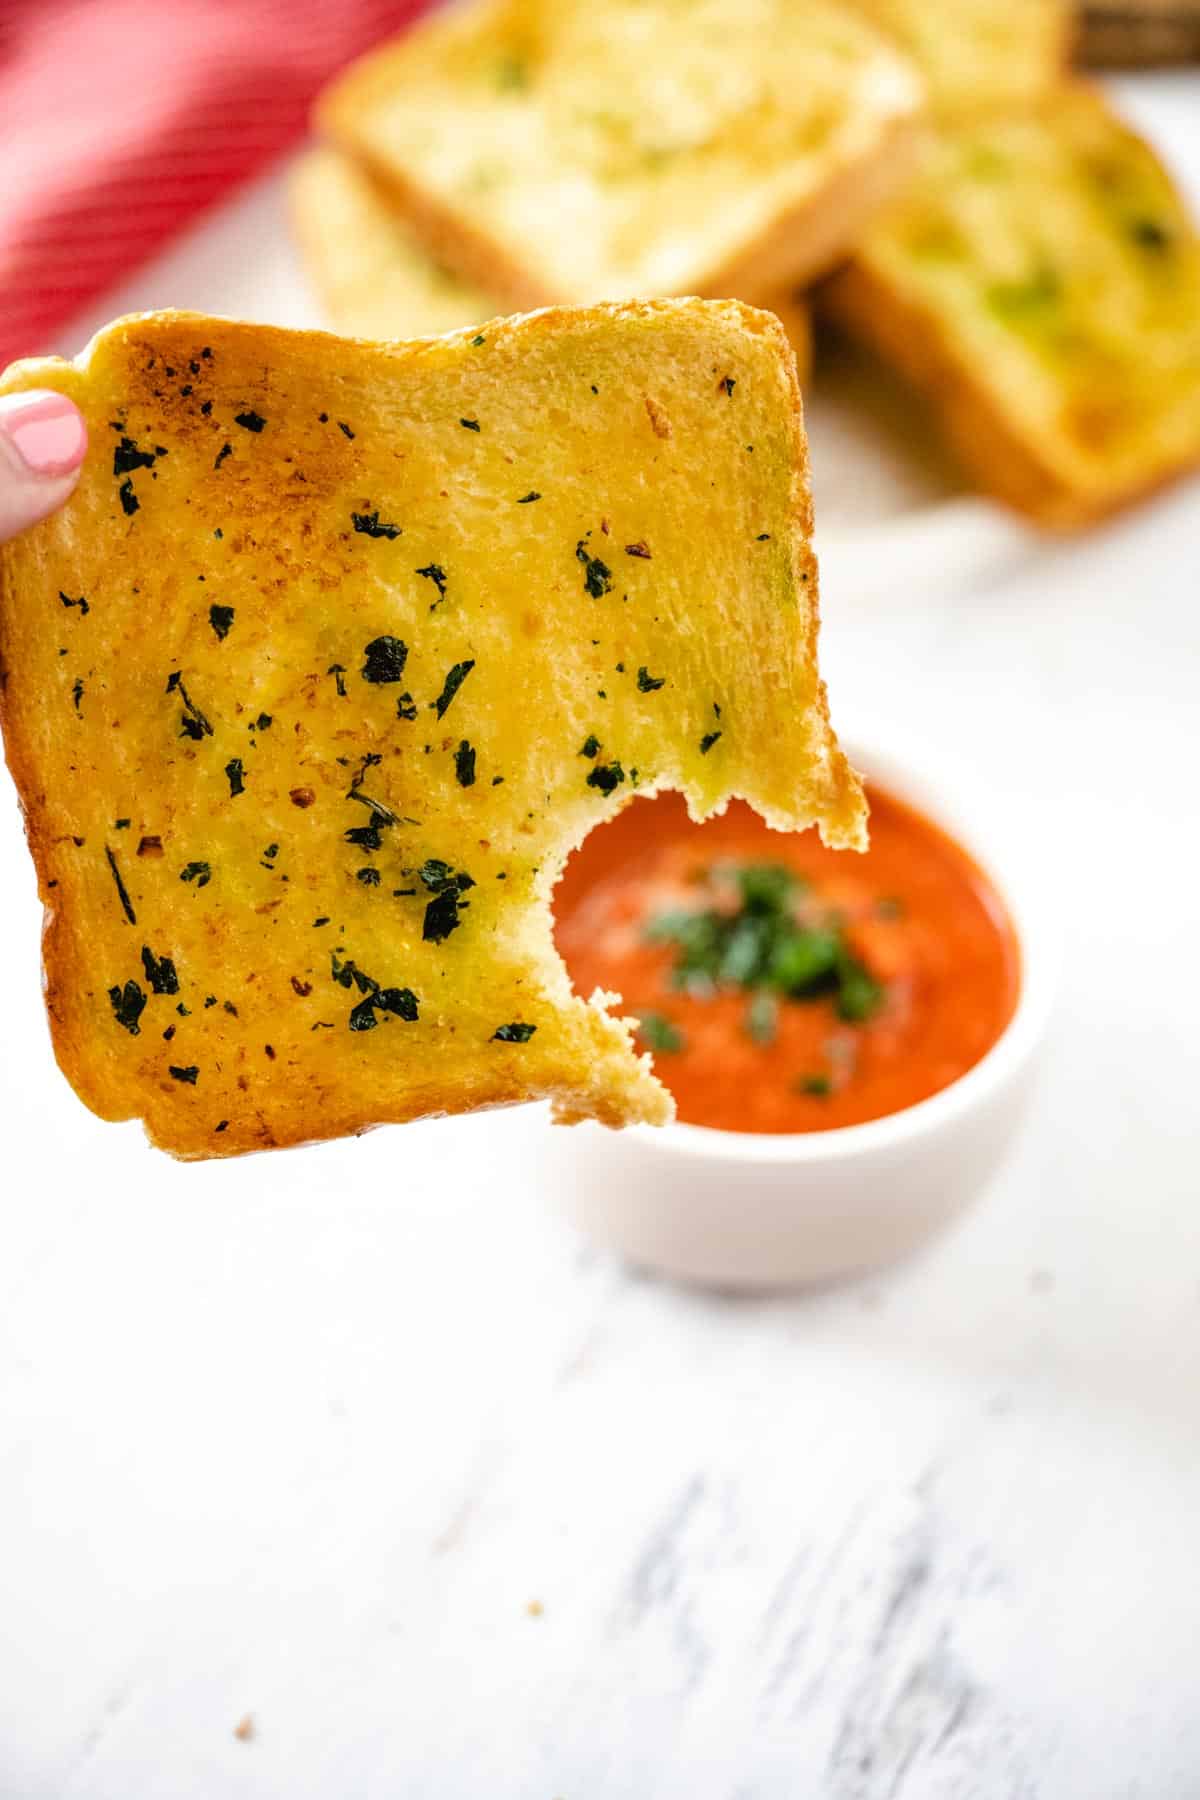 An upclose image of a slice of texas toast garlic bread with a bite taken out of it with a bowl of marinara sauce in the background.